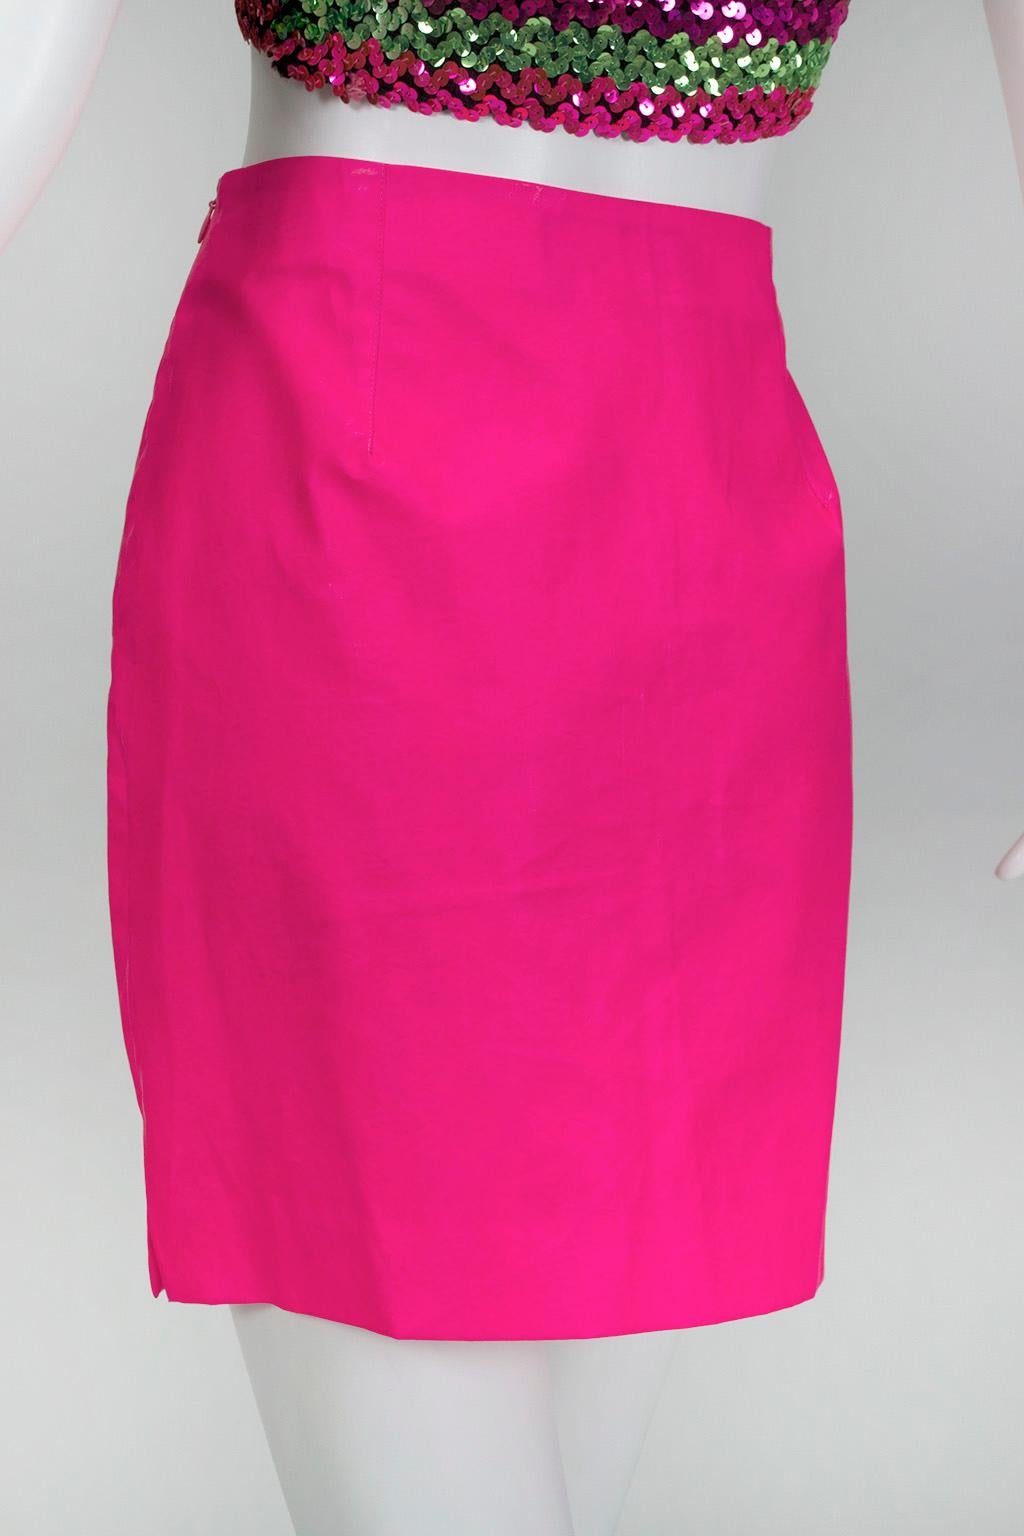 Red Versace Barbiecore Hot Pink Waxed Vegan Leather Mini Skirt - M, 1990s For Sale